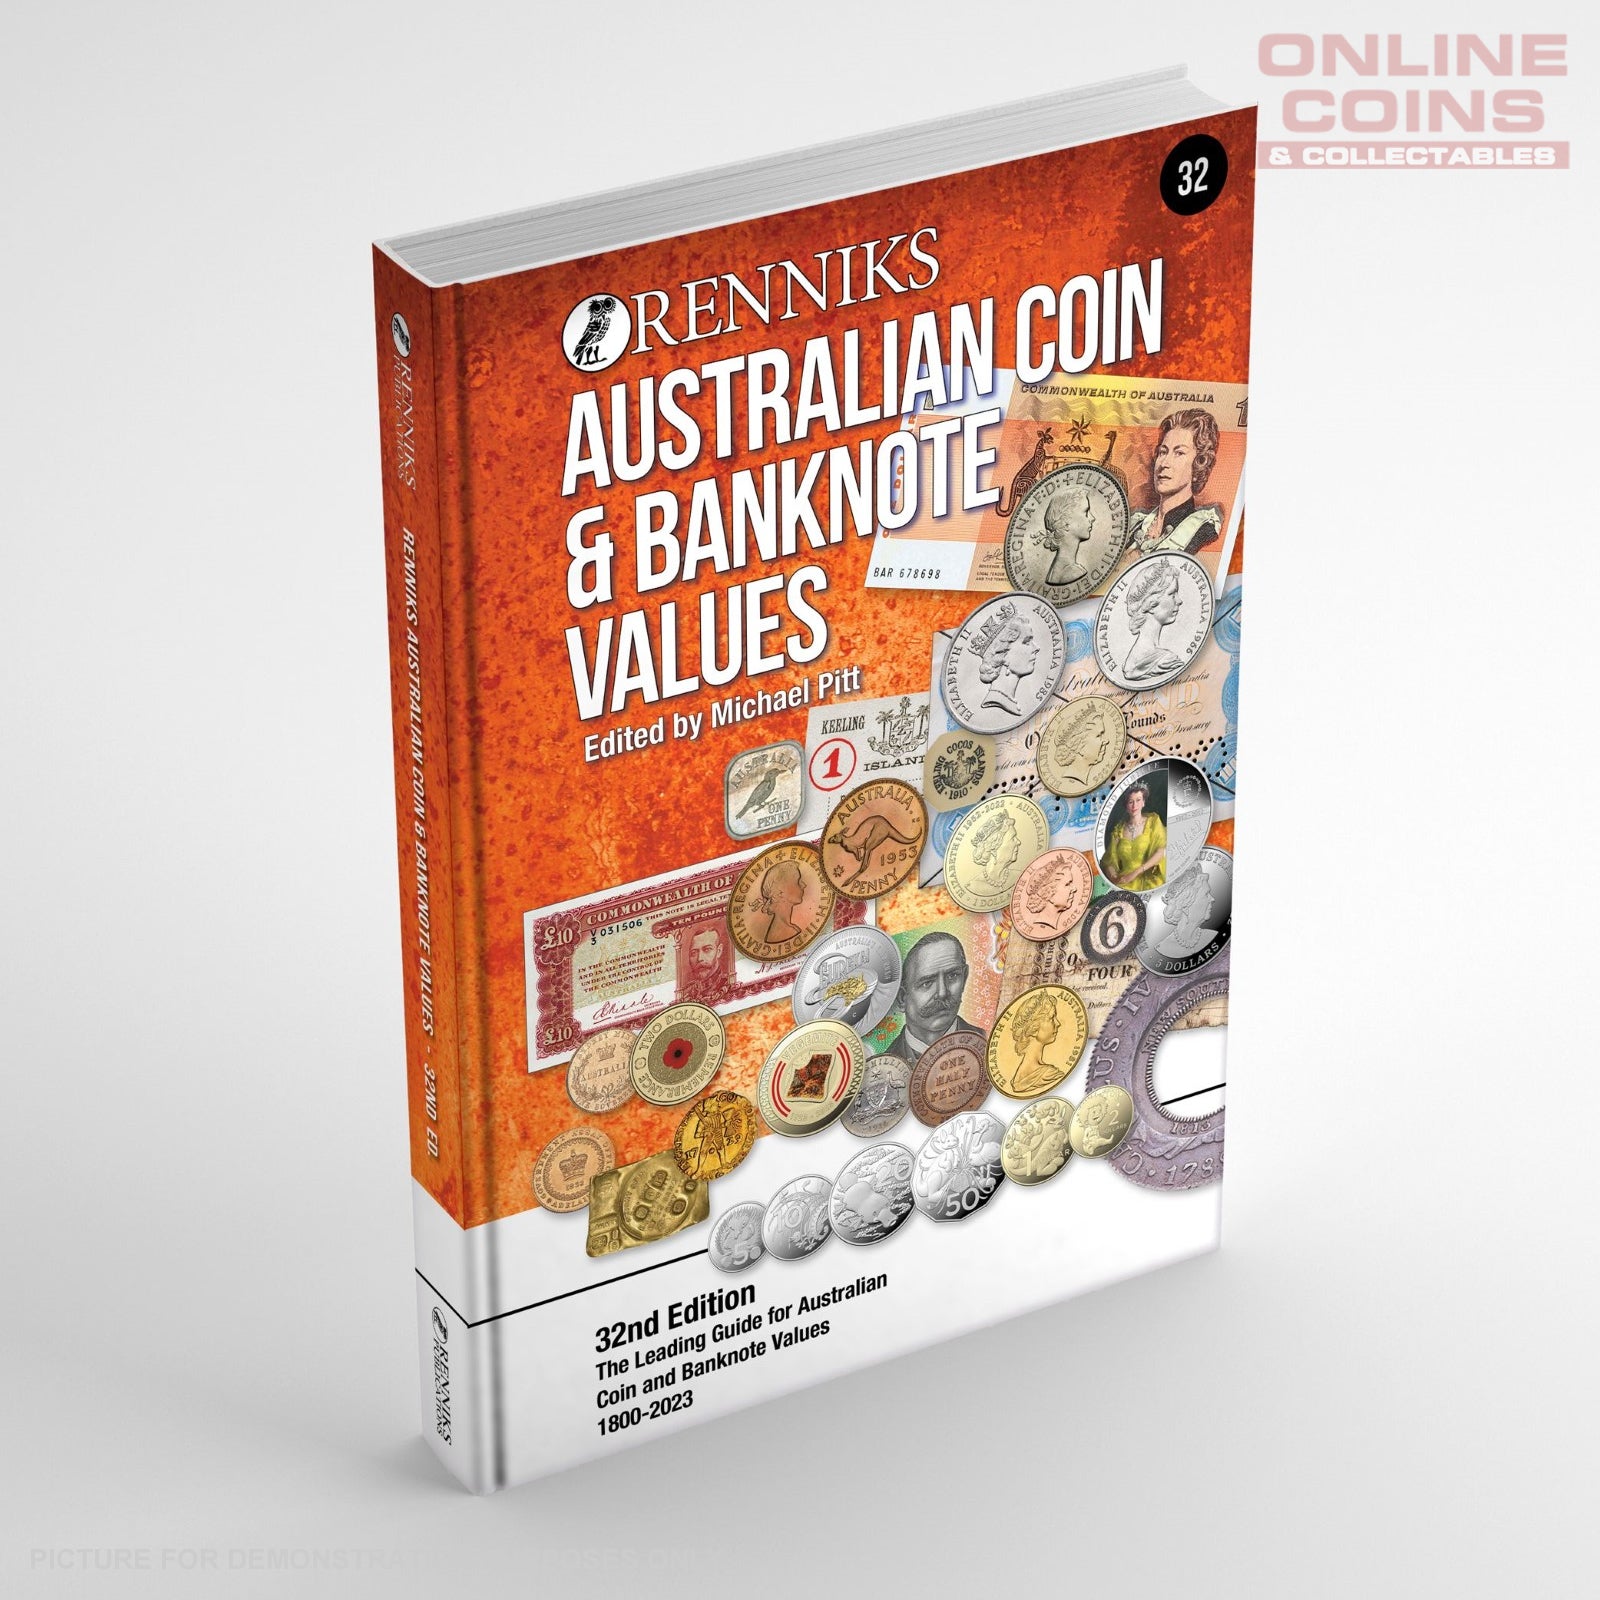 Renniks Australian Coin & Banknote Values 32nd Edition - Hardcover